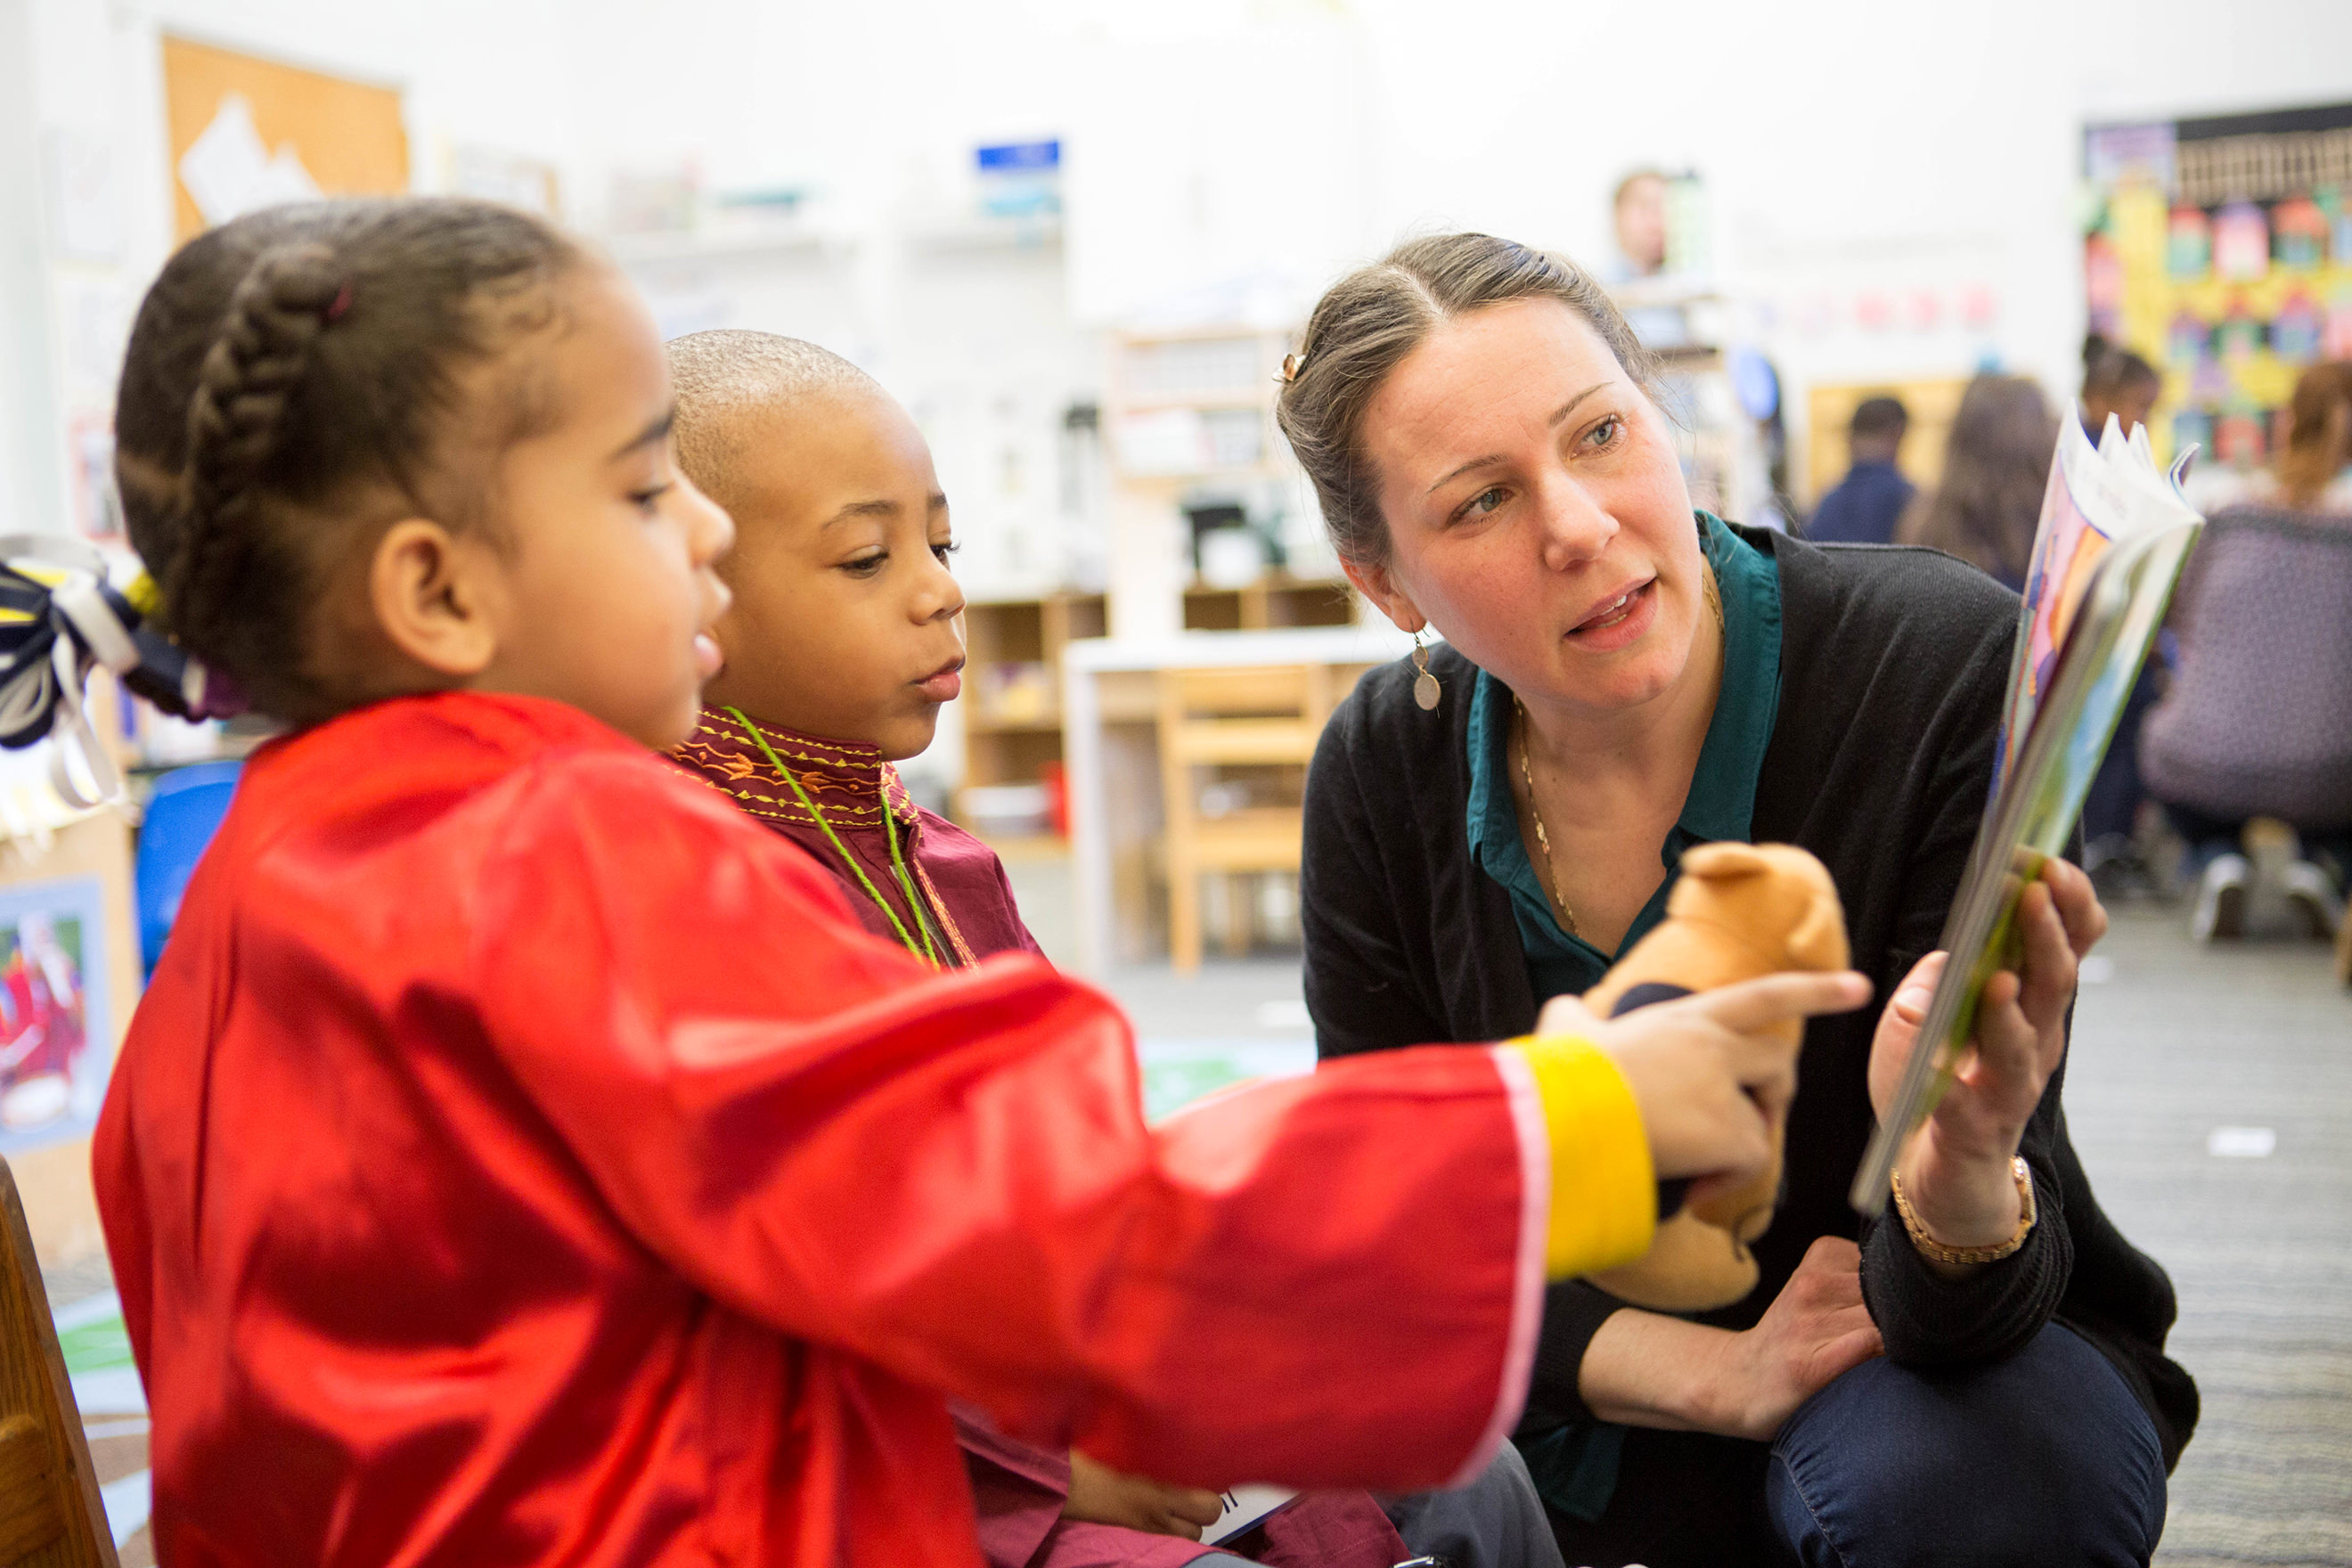 CLI Receives 3-Year Grant for Early Childhood Education from PEW